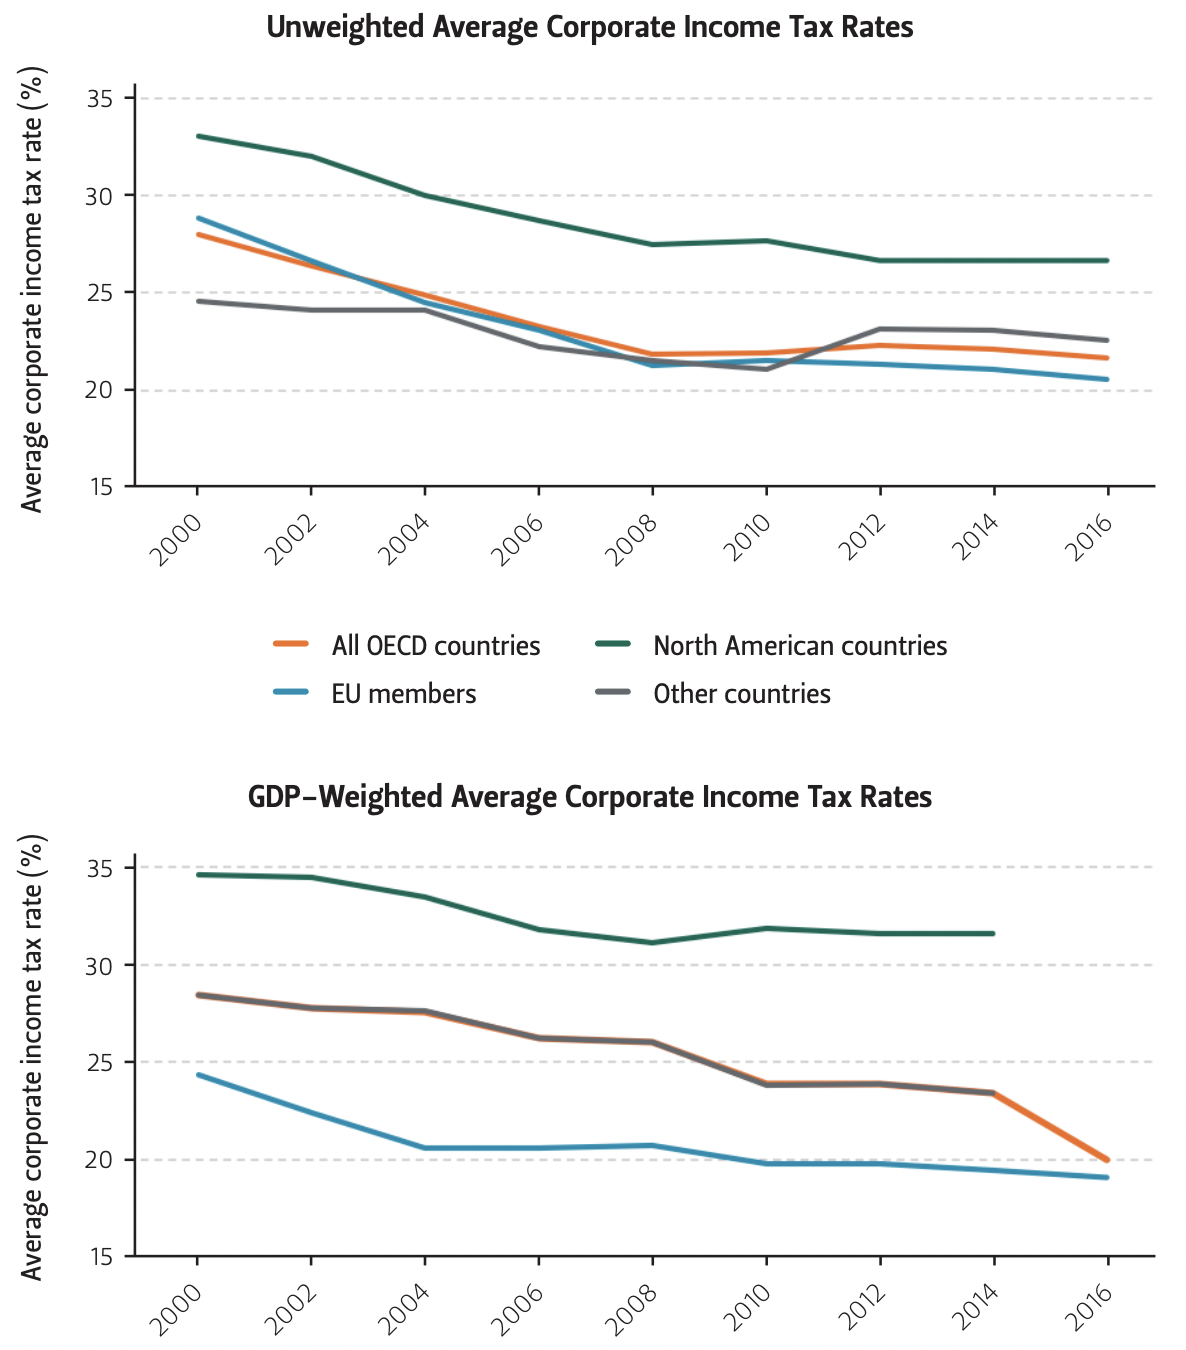 Graph of GDP-weighted and unweighted average corporate income tax rates in various geographic locations